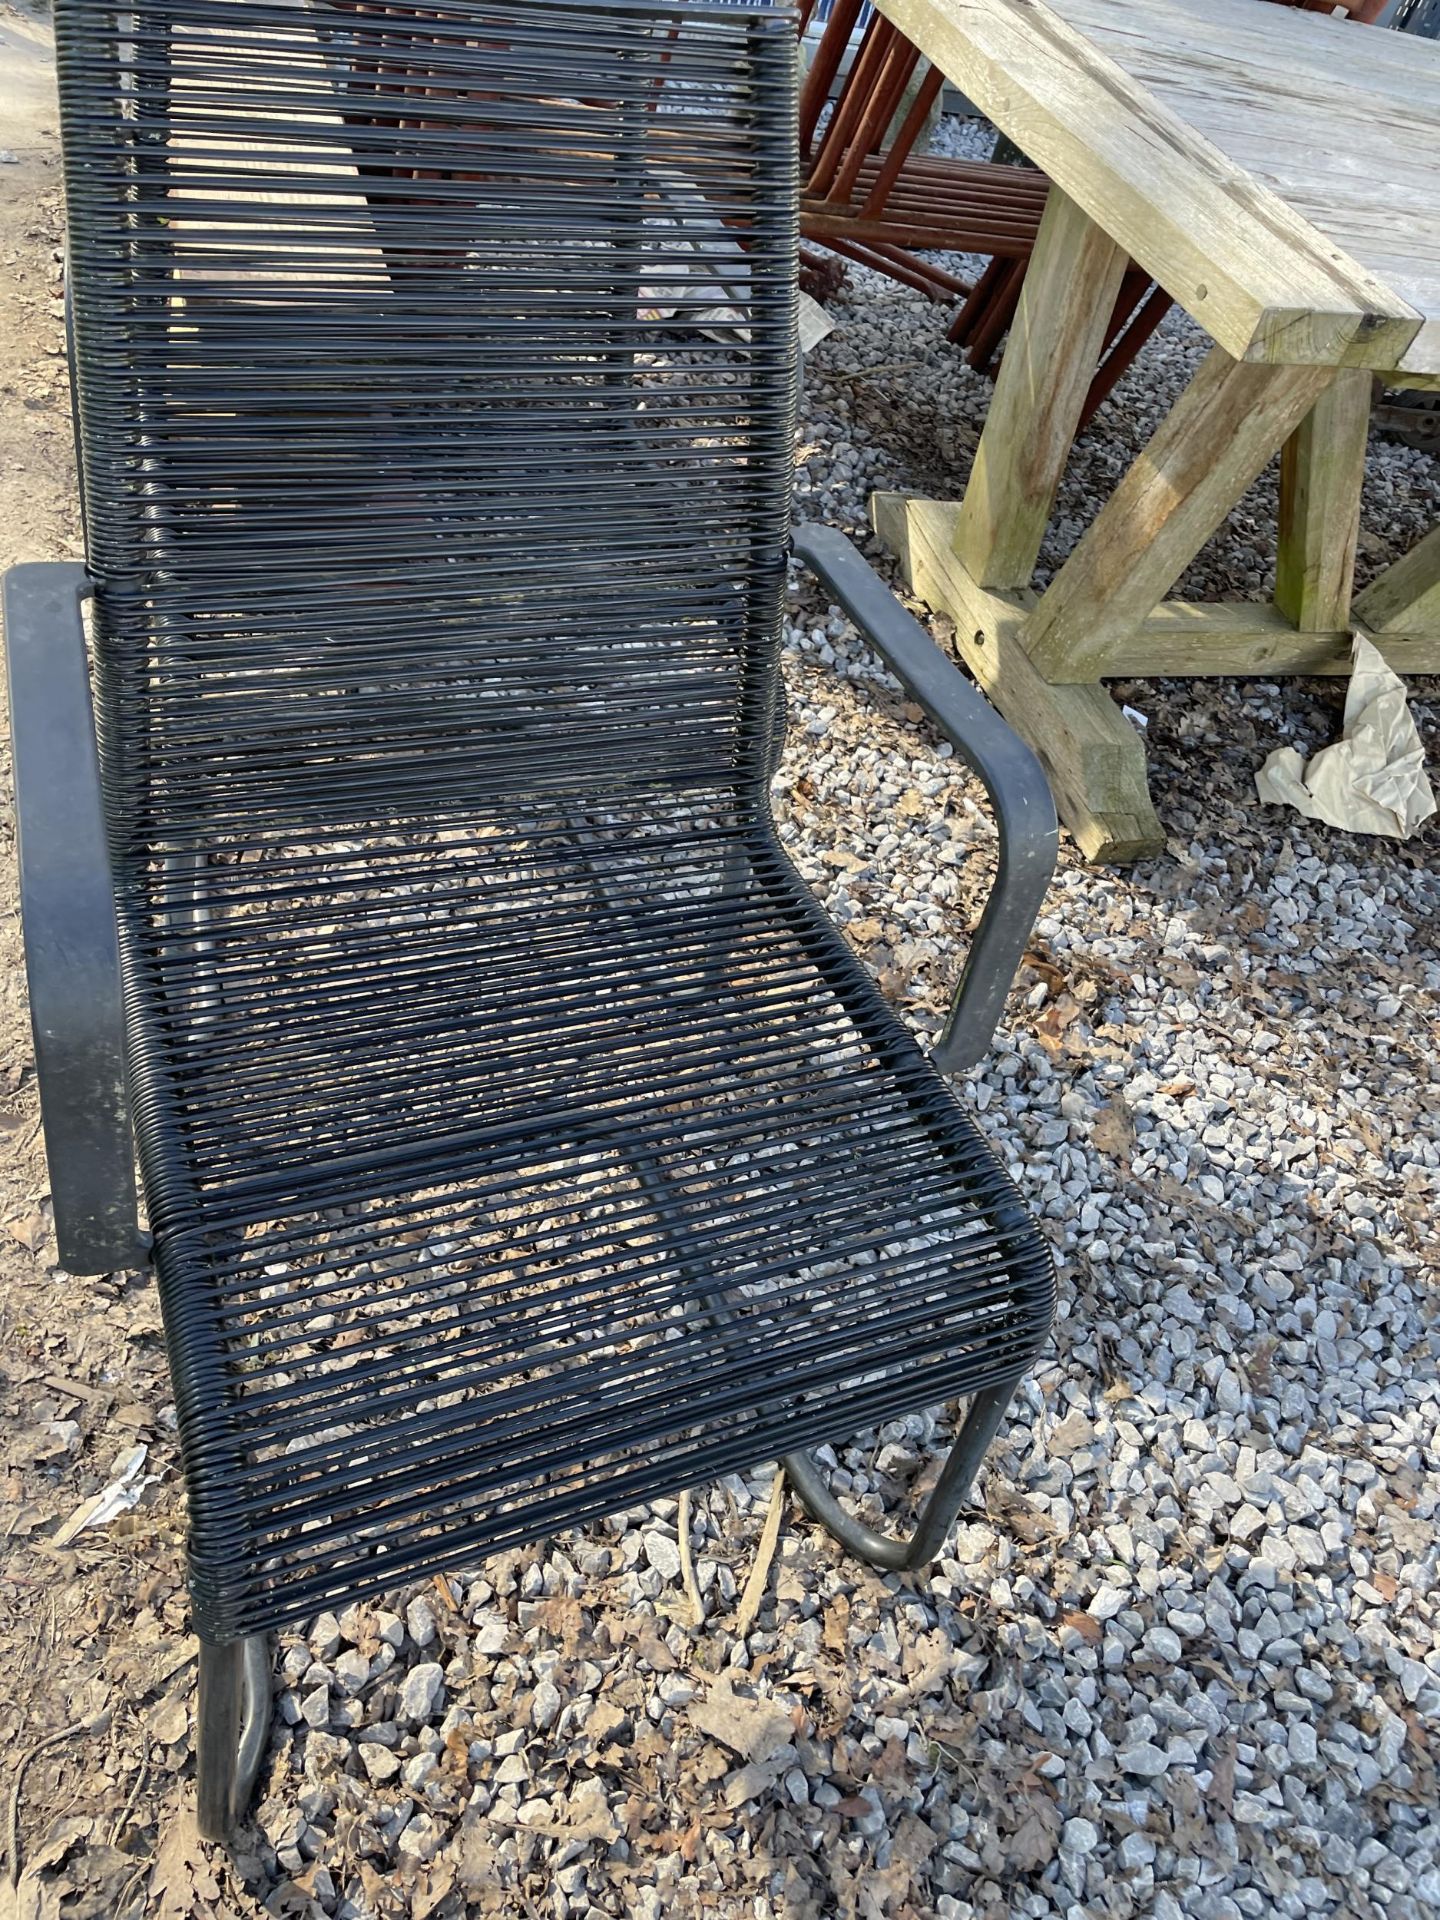 TWO METAL GARDEN CHAIRS WITH PLASTIC STRING SEATS - Image 2 of 2